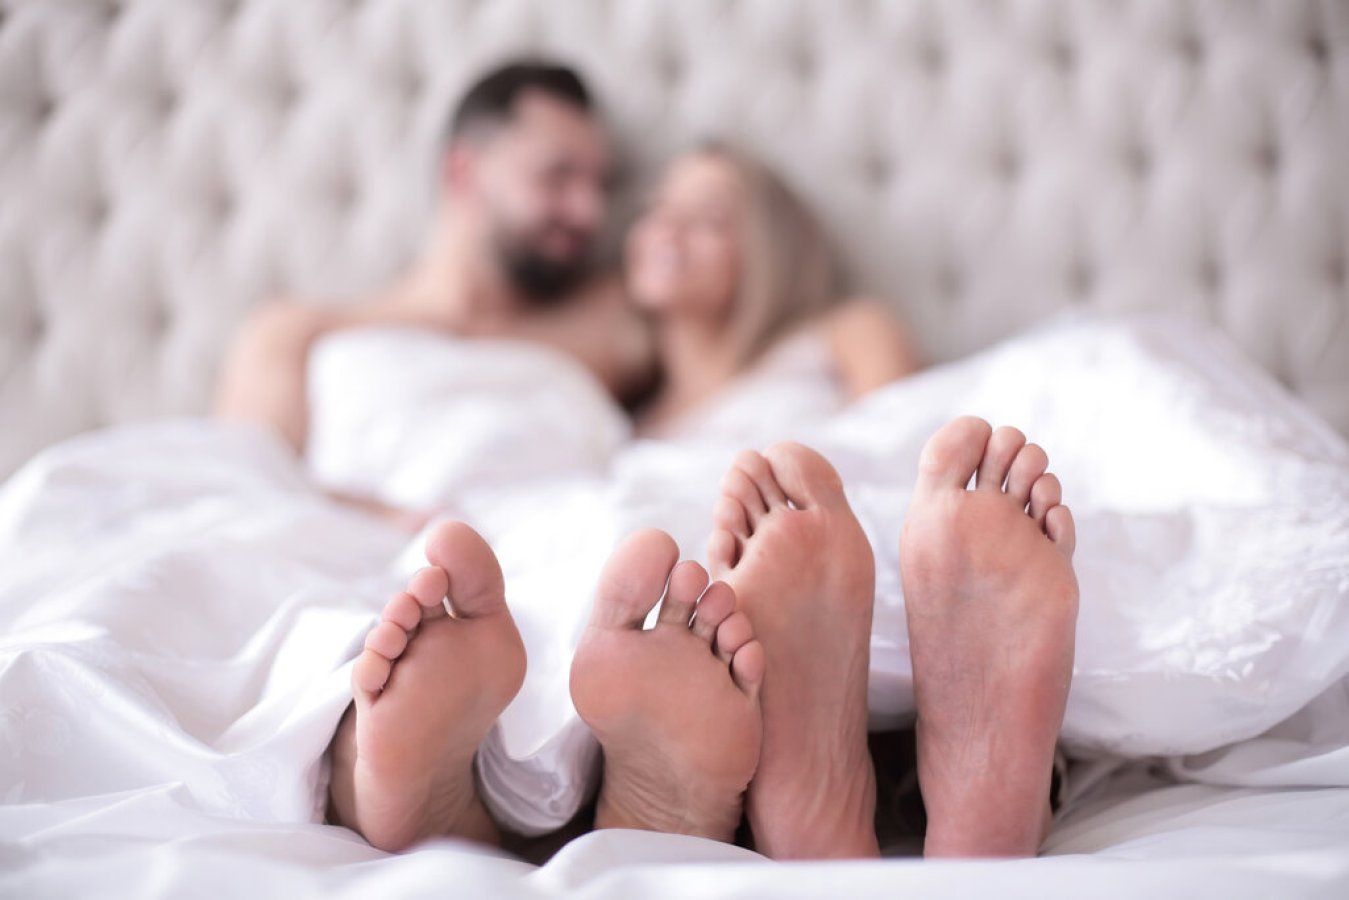 A new study shows how often married people have sex